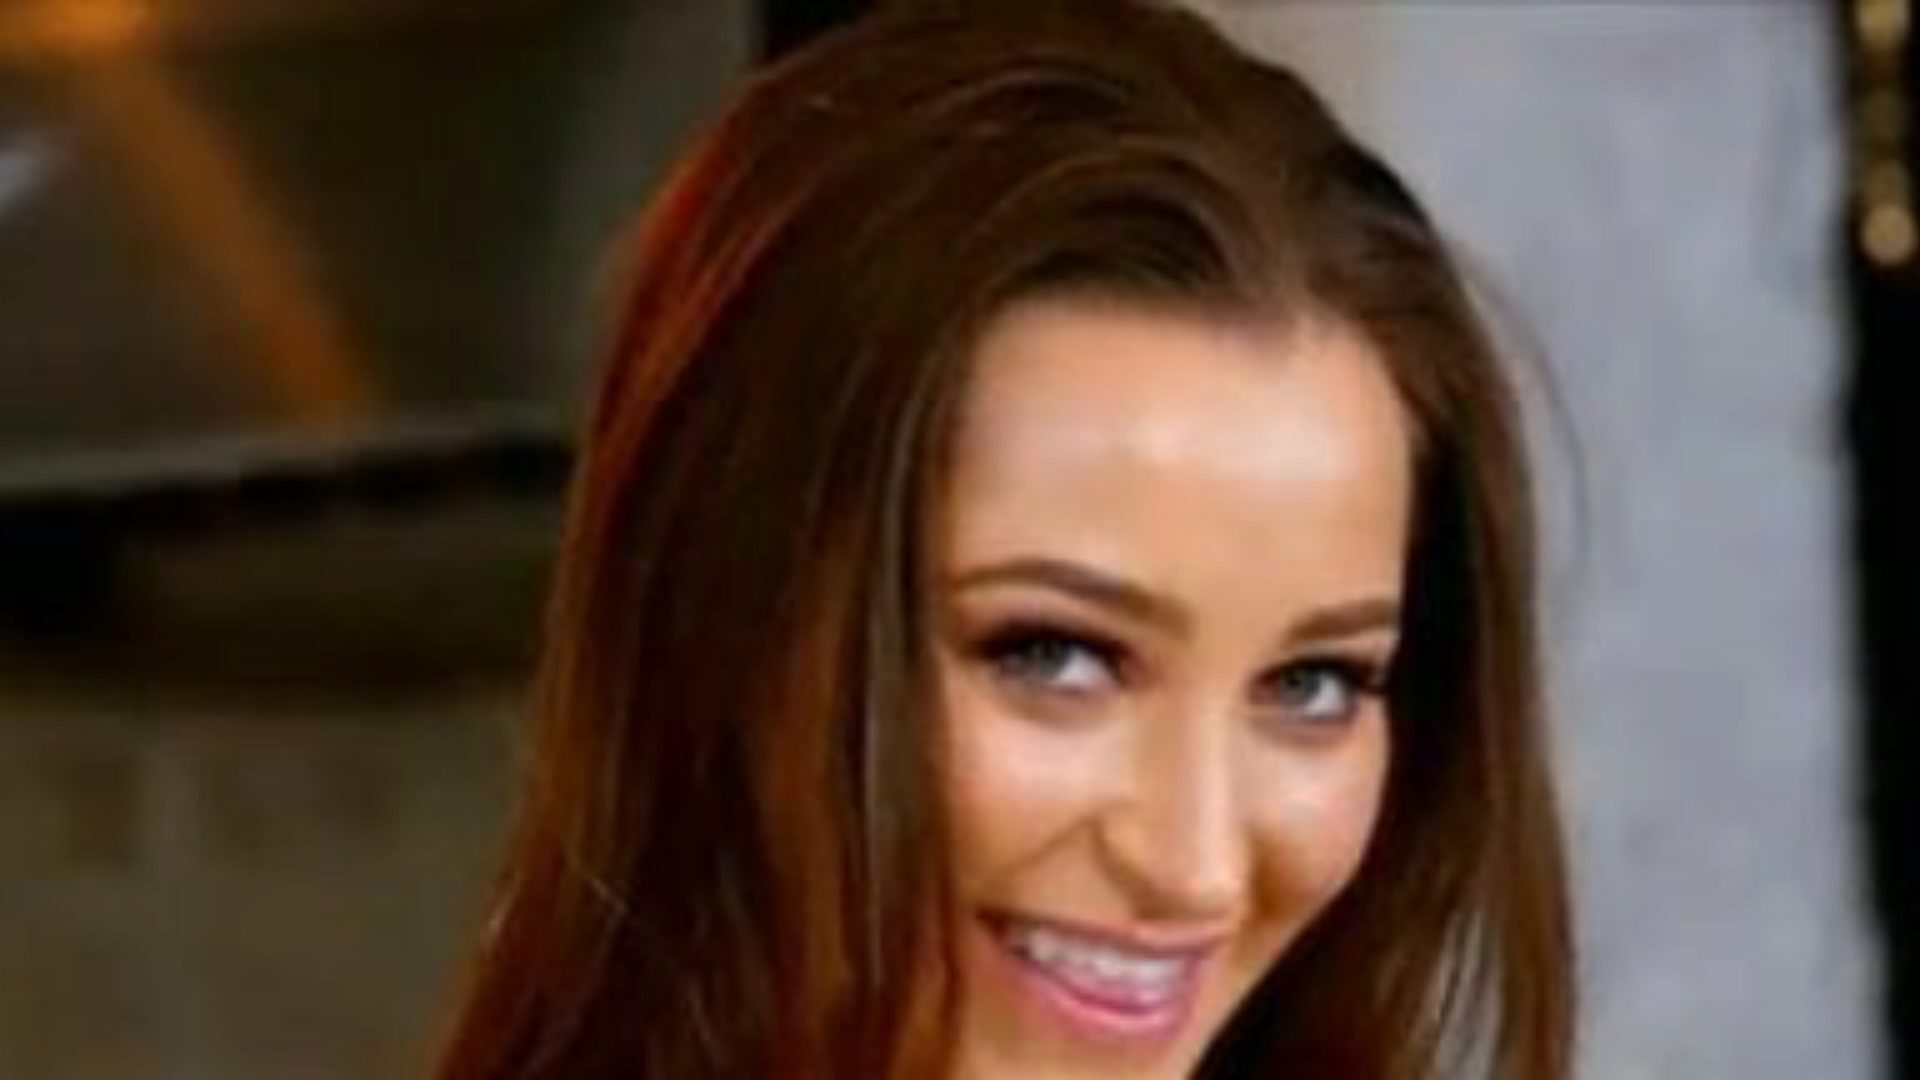 Dani Daniels Solo Cooking, Free Hot Striptease Porn Video 85 Watch Dani Daniels Solo Cooking episode on xHamster, the greatest orgy tube site with tons of free Hot Striptease Hot Strip & Sexy pornography movies